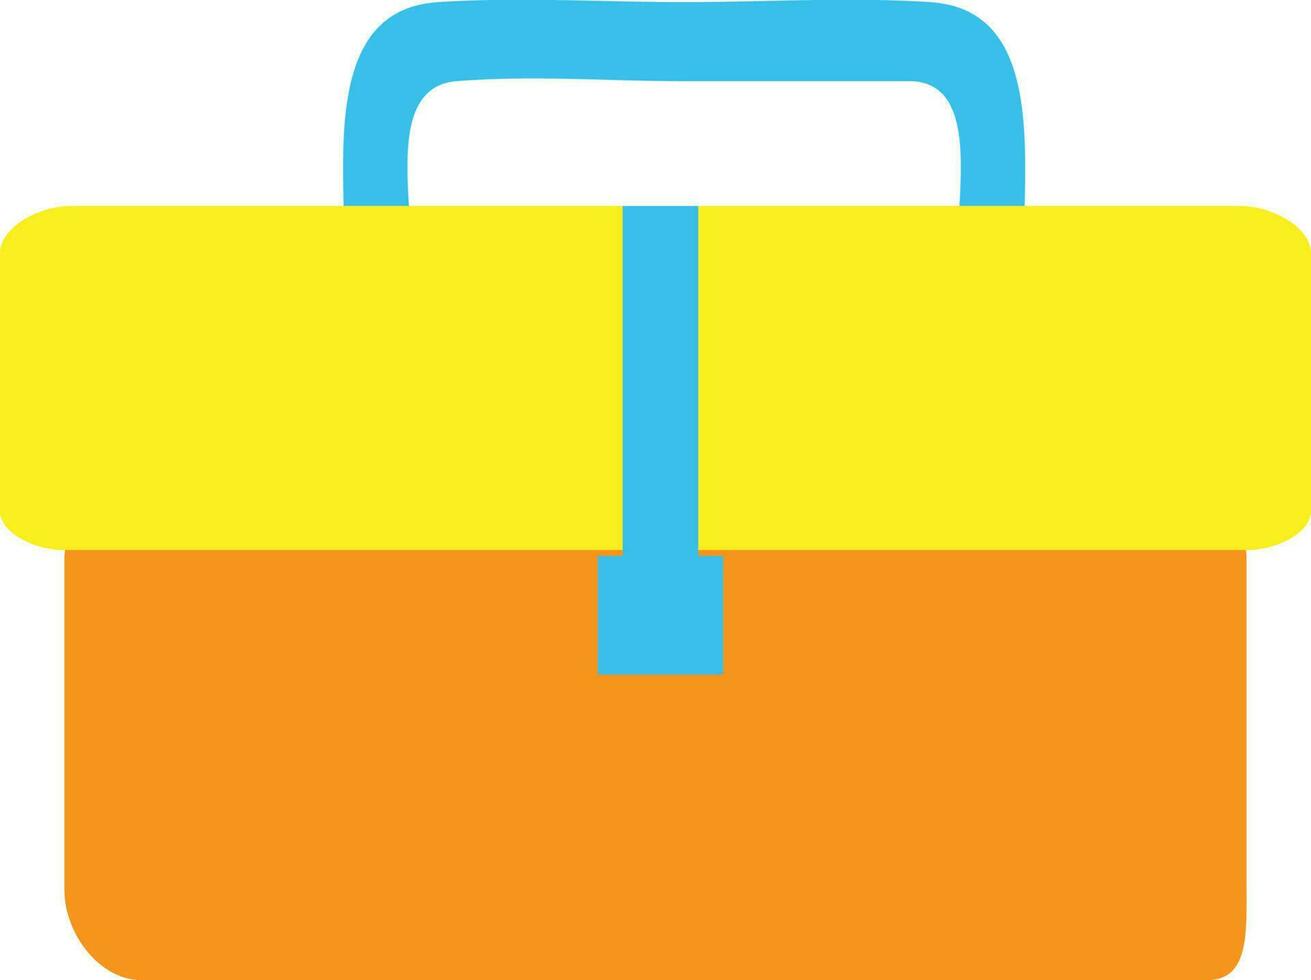 Briefcase bag in yellow and orange, blue color. vector